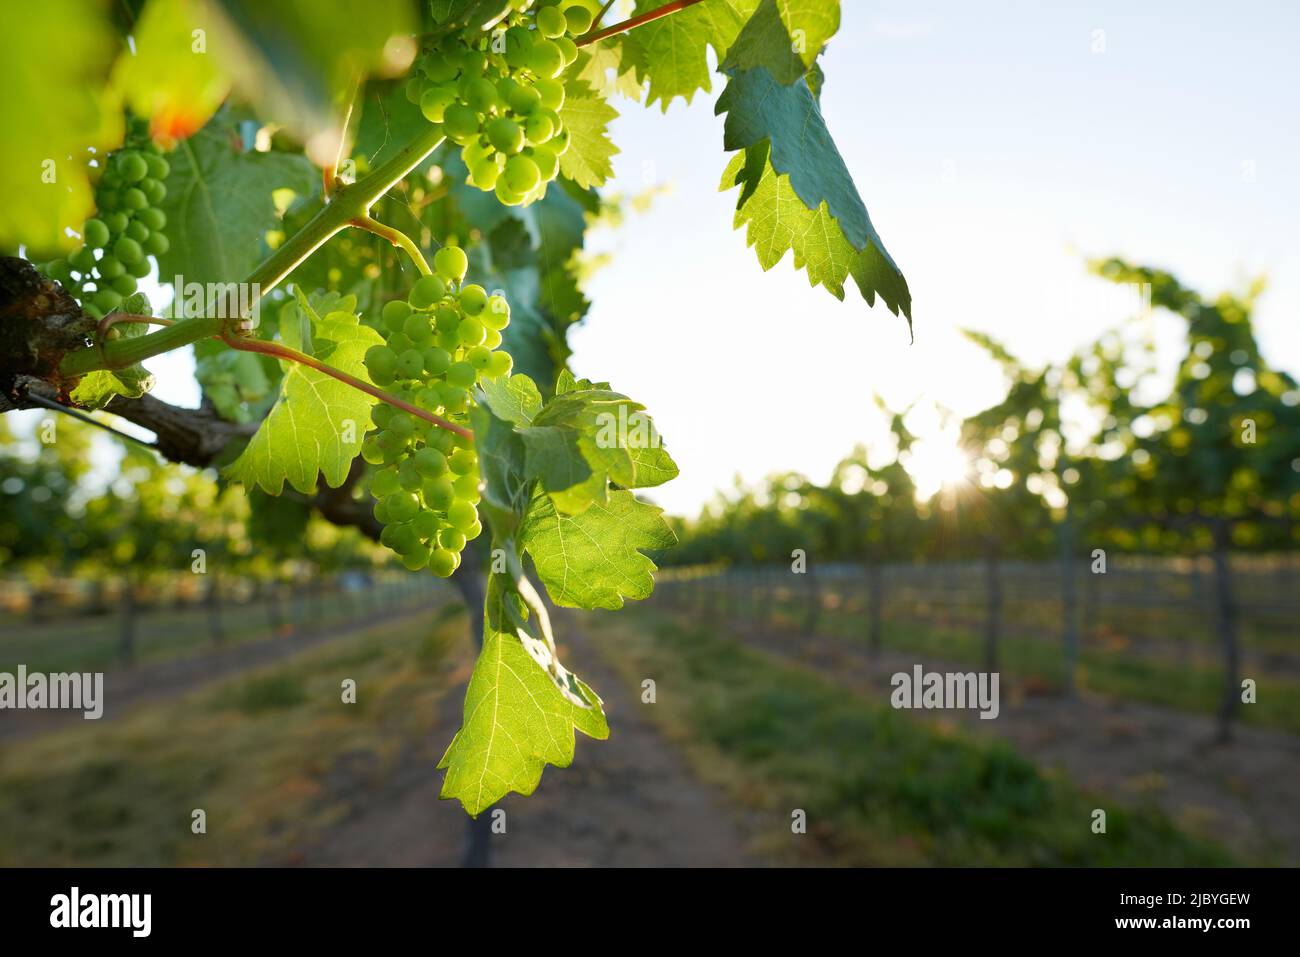 Rows of grapevines laden with grapes in Vineyard and afternoon light Stock Photo